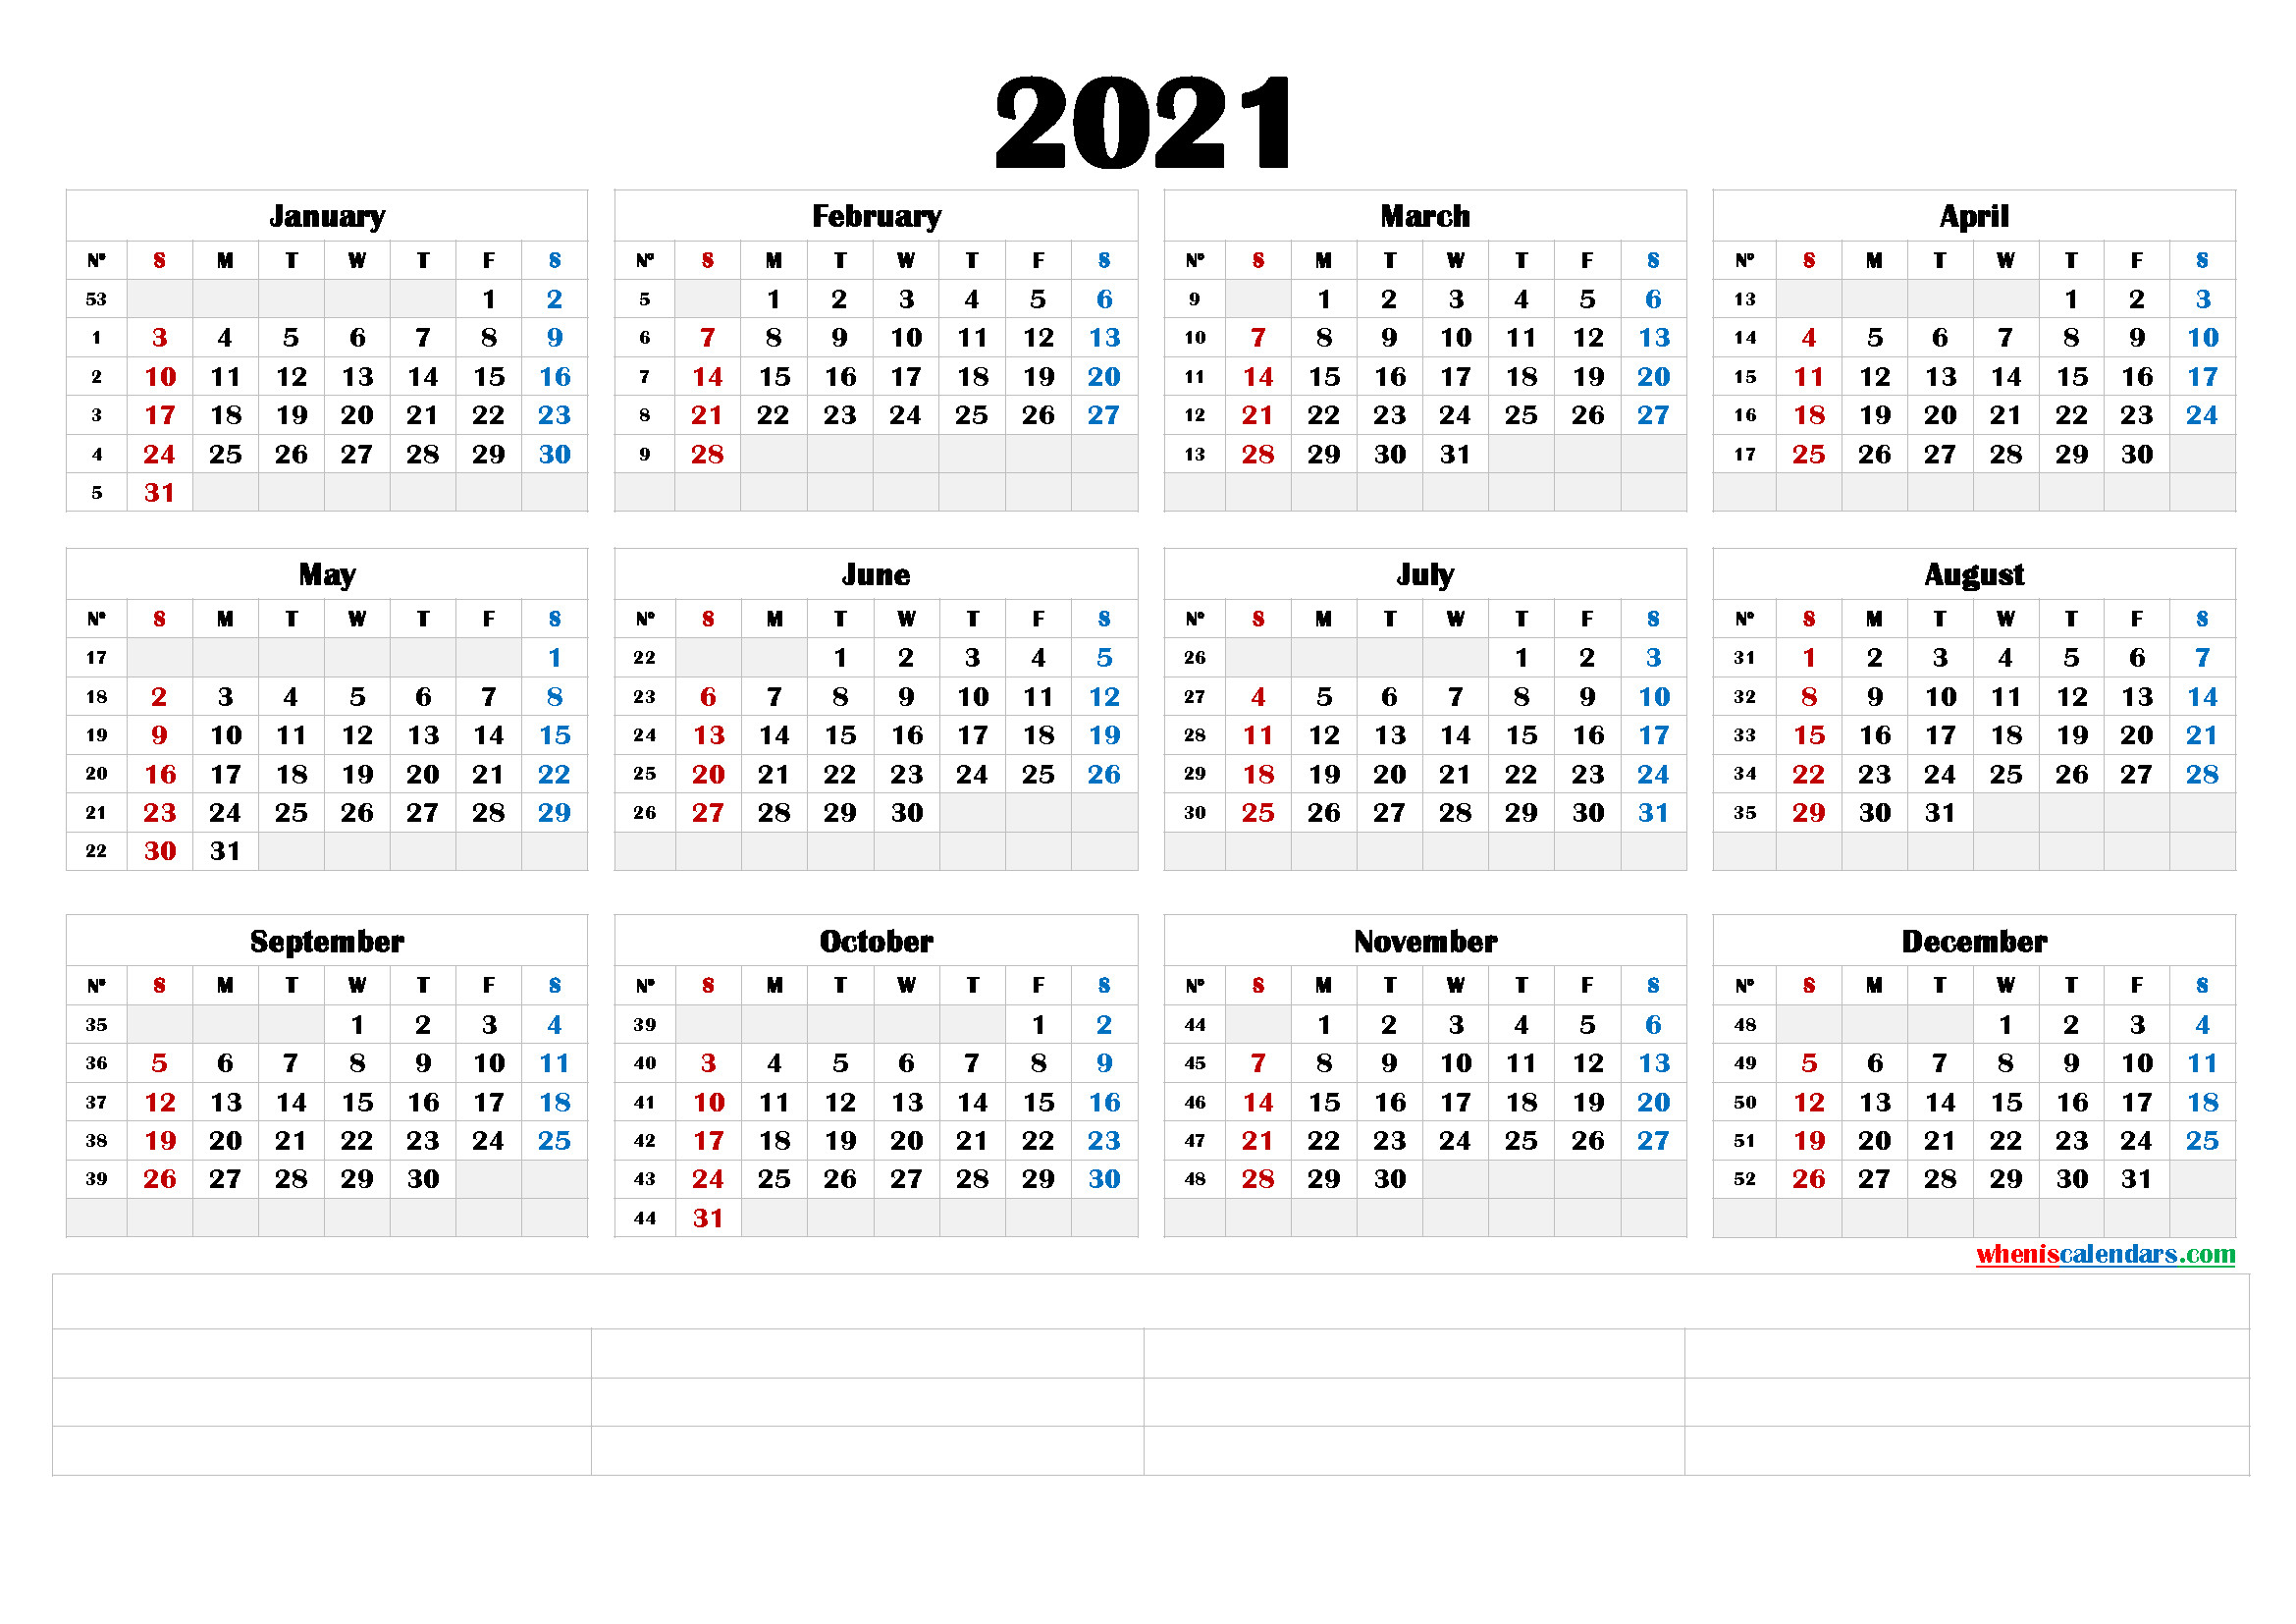 Free 2021 Yearly Calender Template - 24 Pretty Free-2021 Yearly 2 Page Calendar